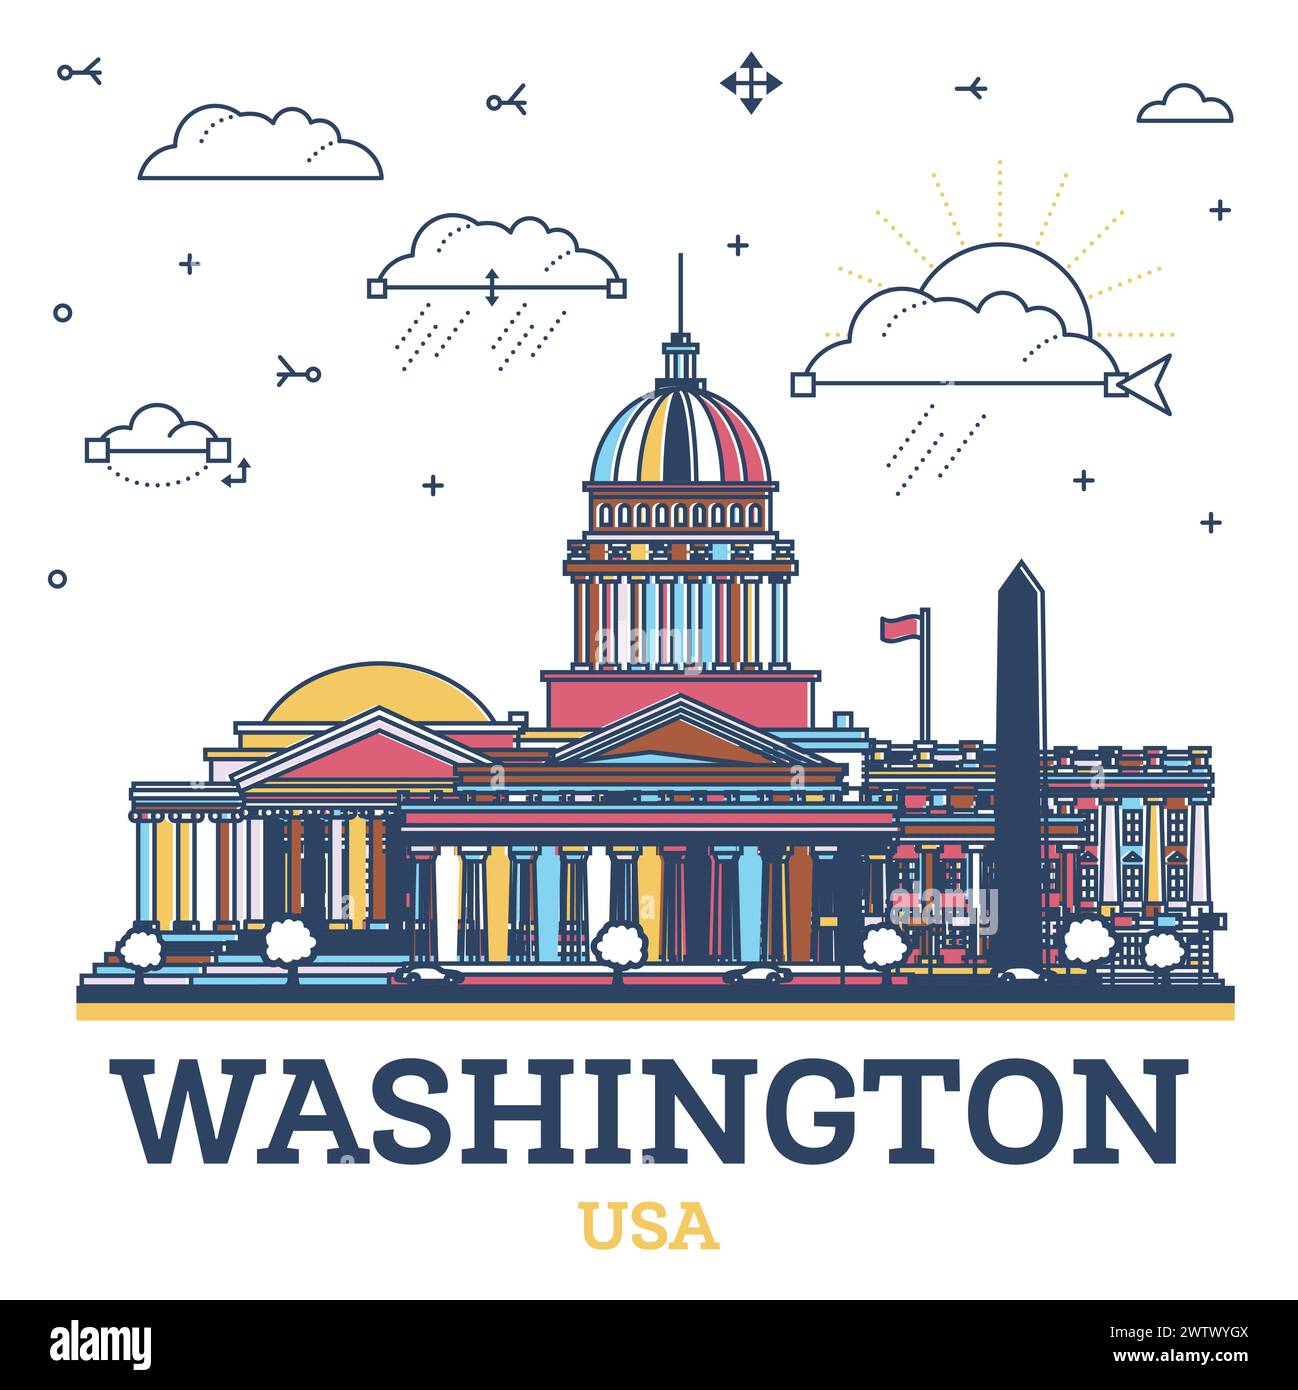 Outline Washington DC USA City Skyline with colored Modern Buildings Isolated on White. Vector Illustration. Washington DC Cityscape with Landmarks. Stock Vector